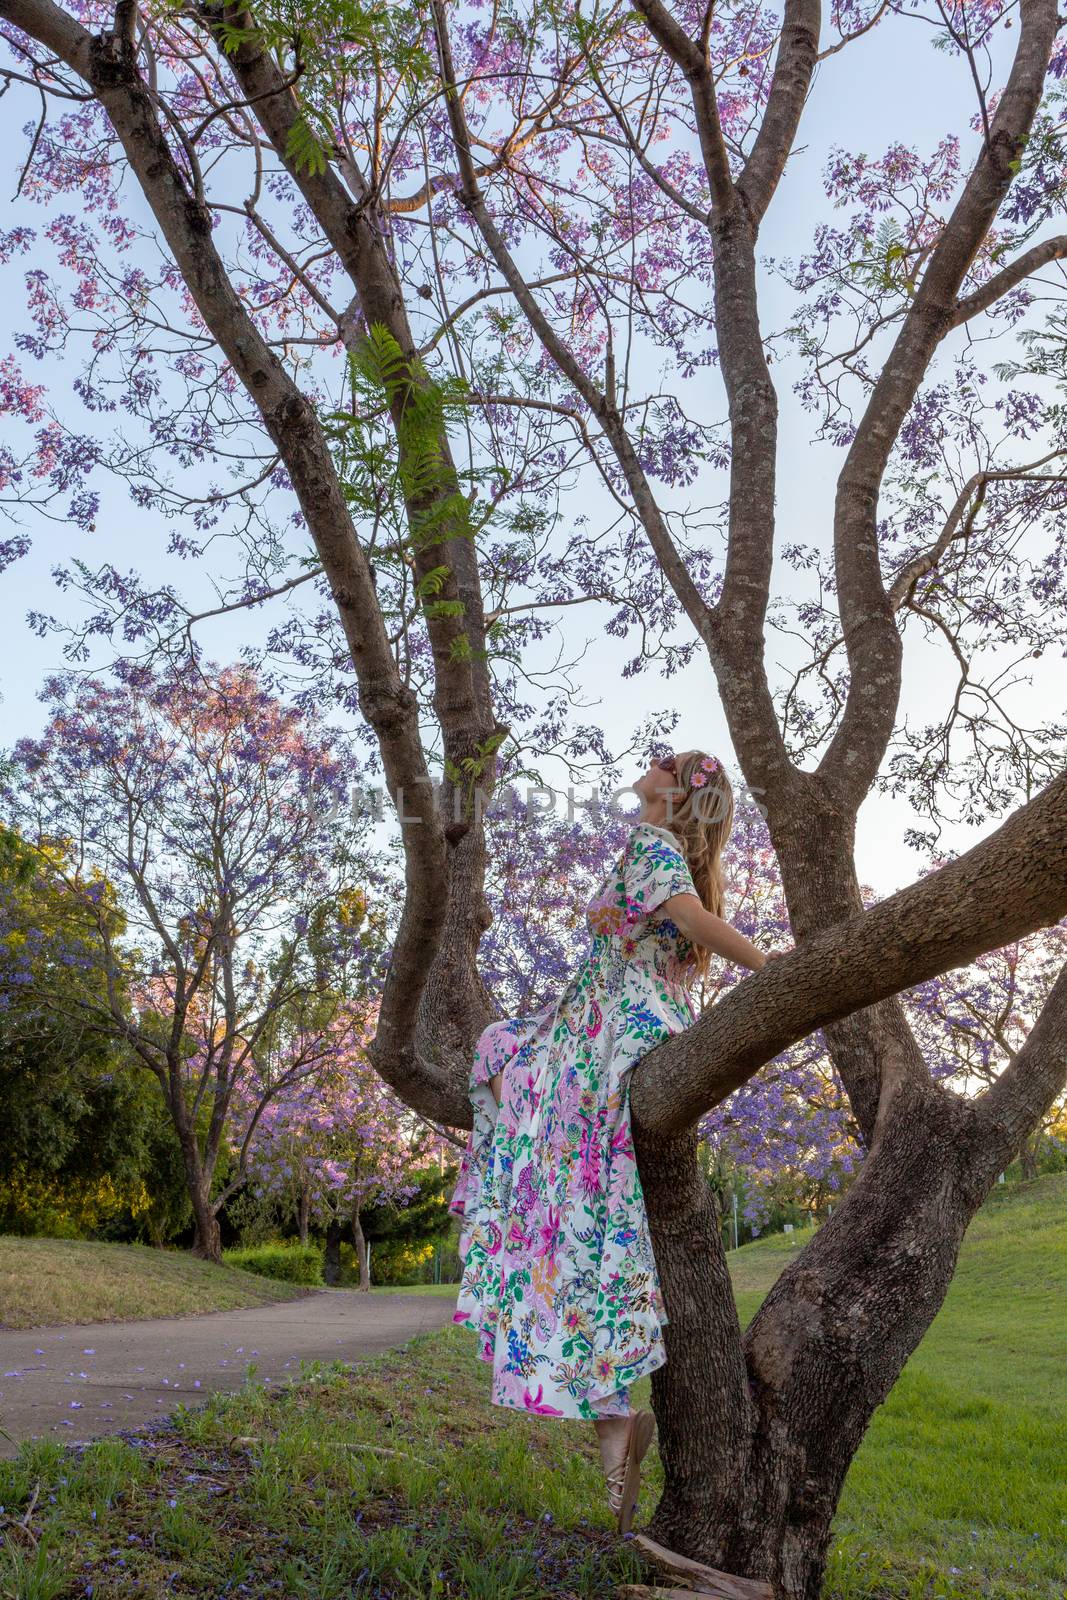 A woman sits in the branch of a tree admiring purple Jacaranda f by lovleah